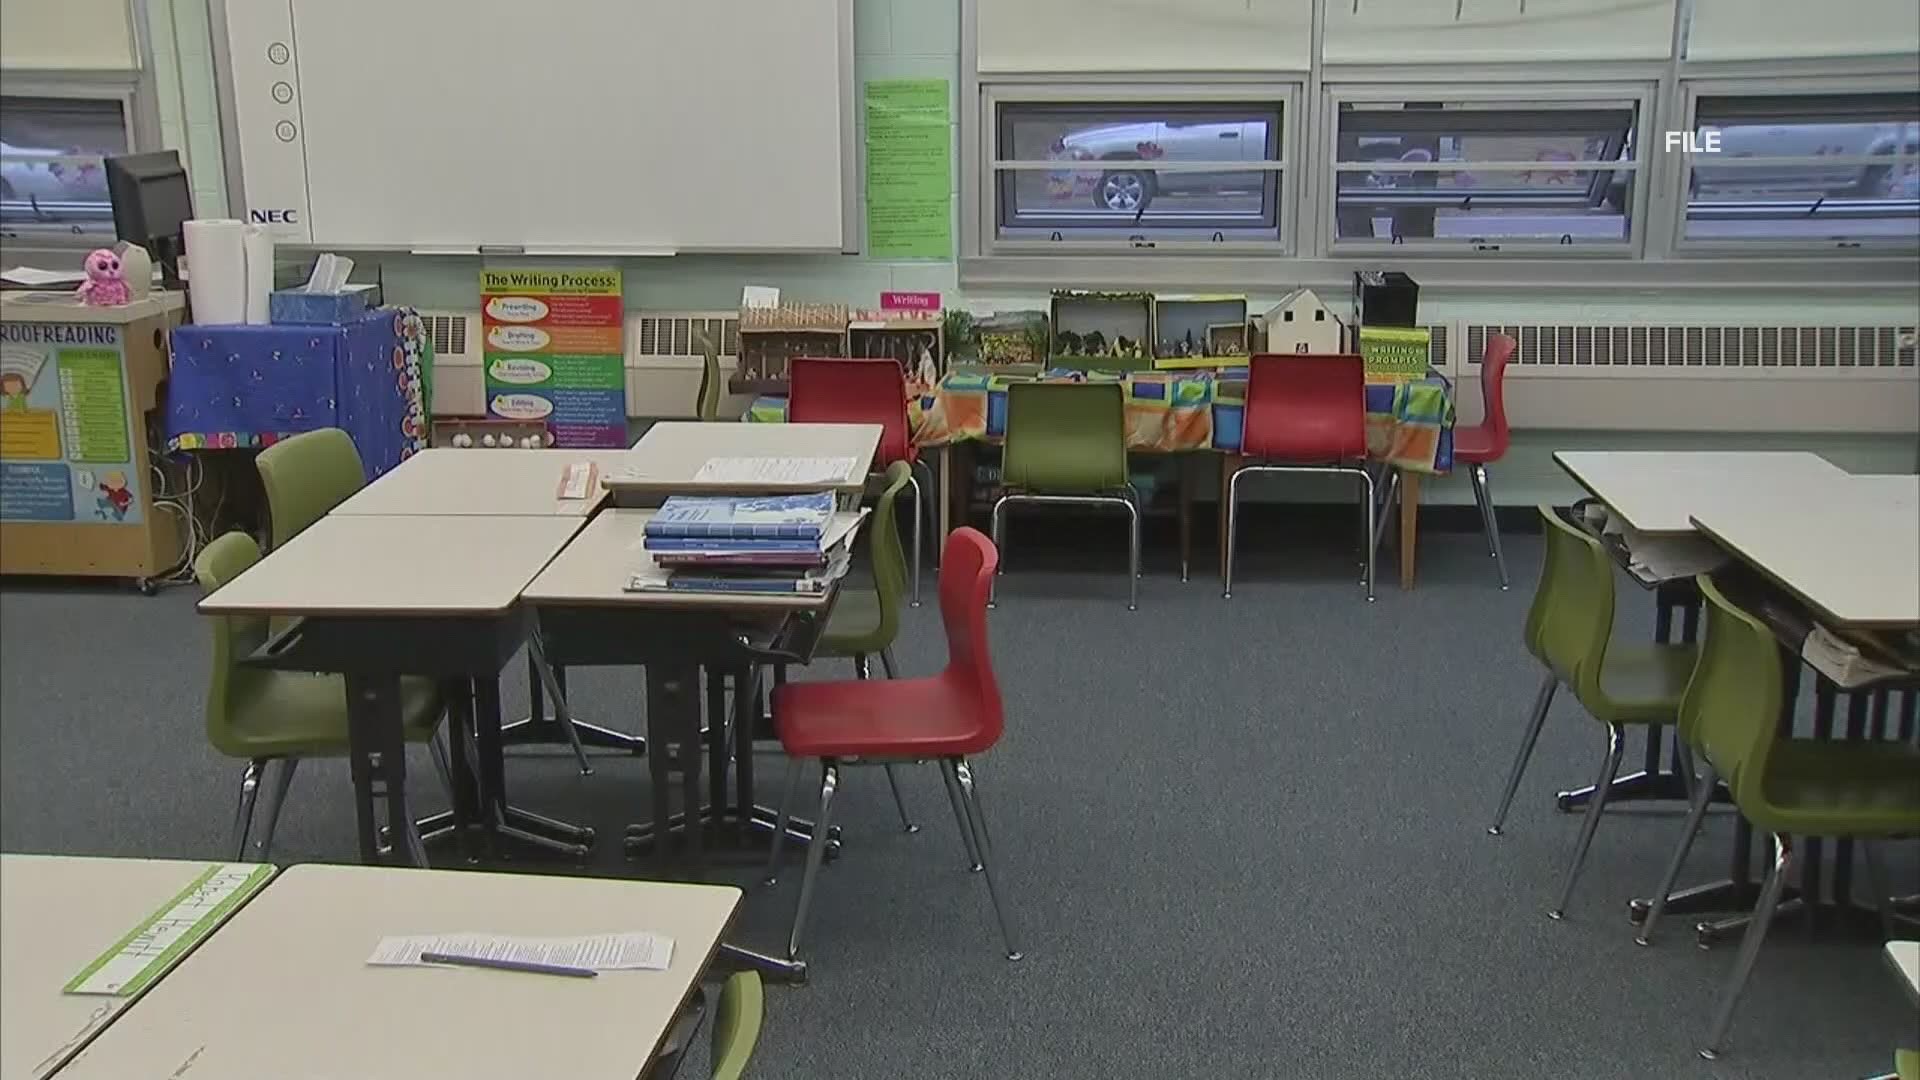 The return to school is coming and districts across the state are working on plans to keep students and staff safe.